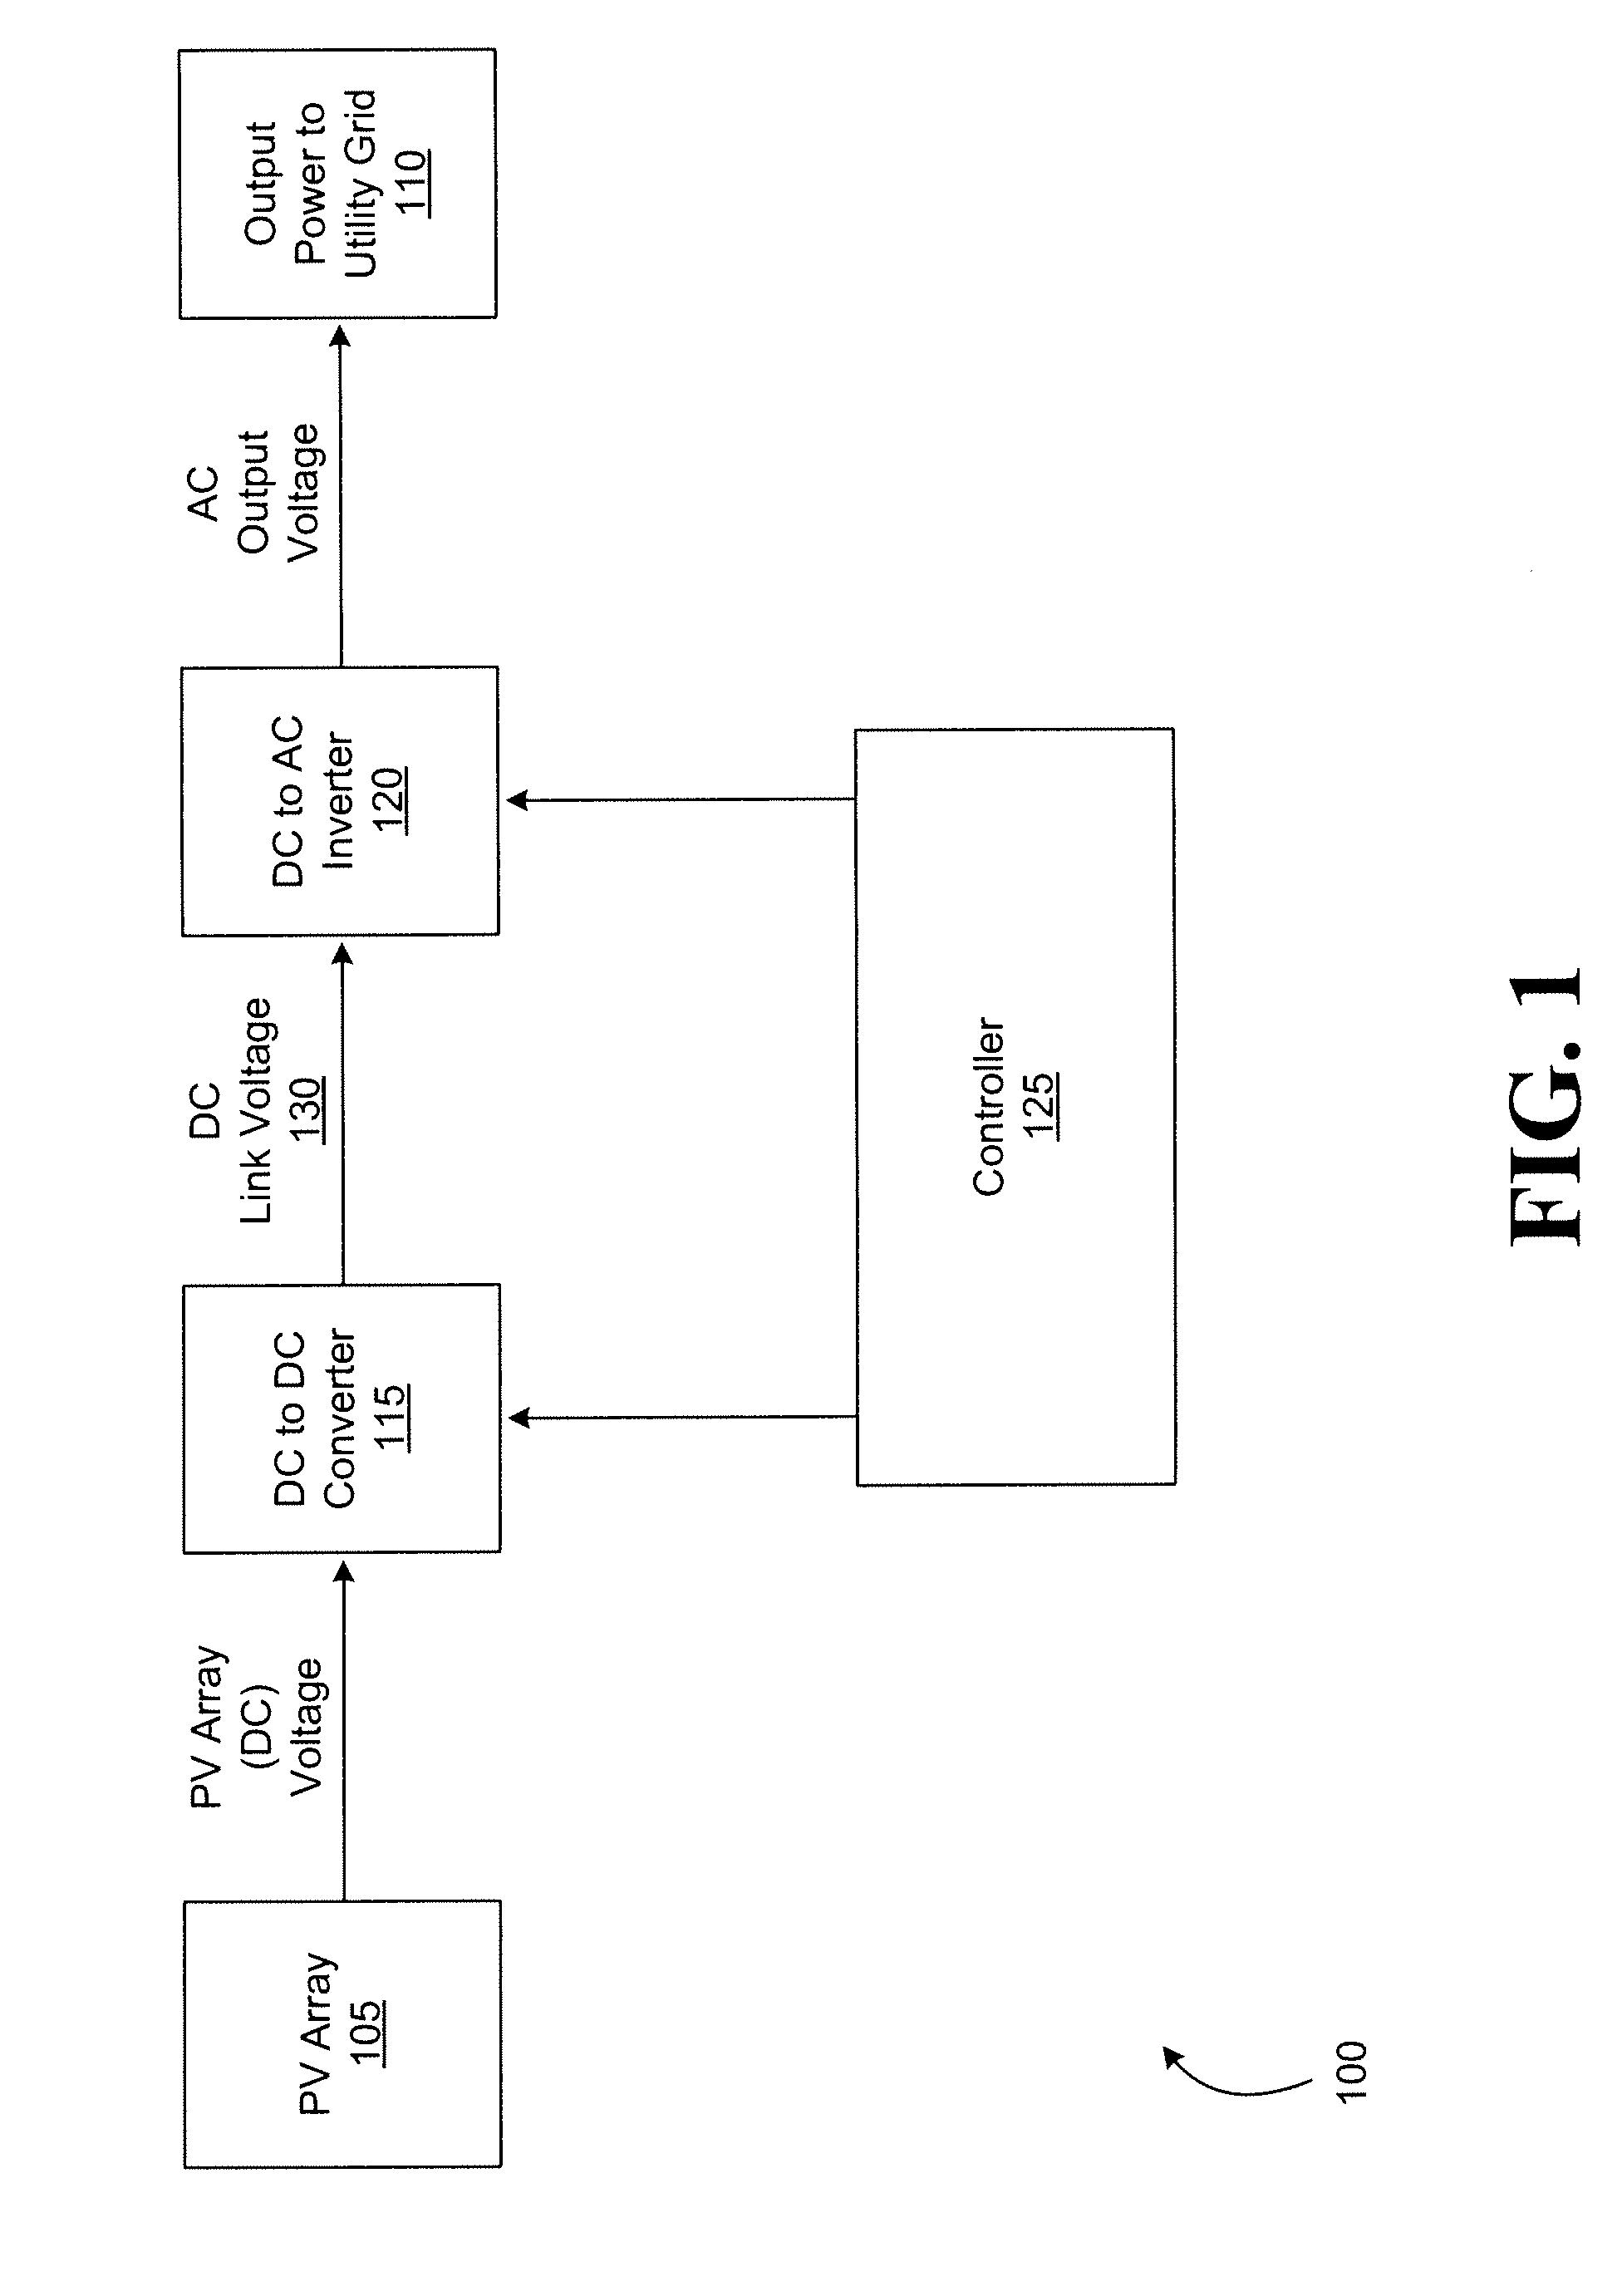 Systems, Methods, and Apparatus for Operating a Power Converter